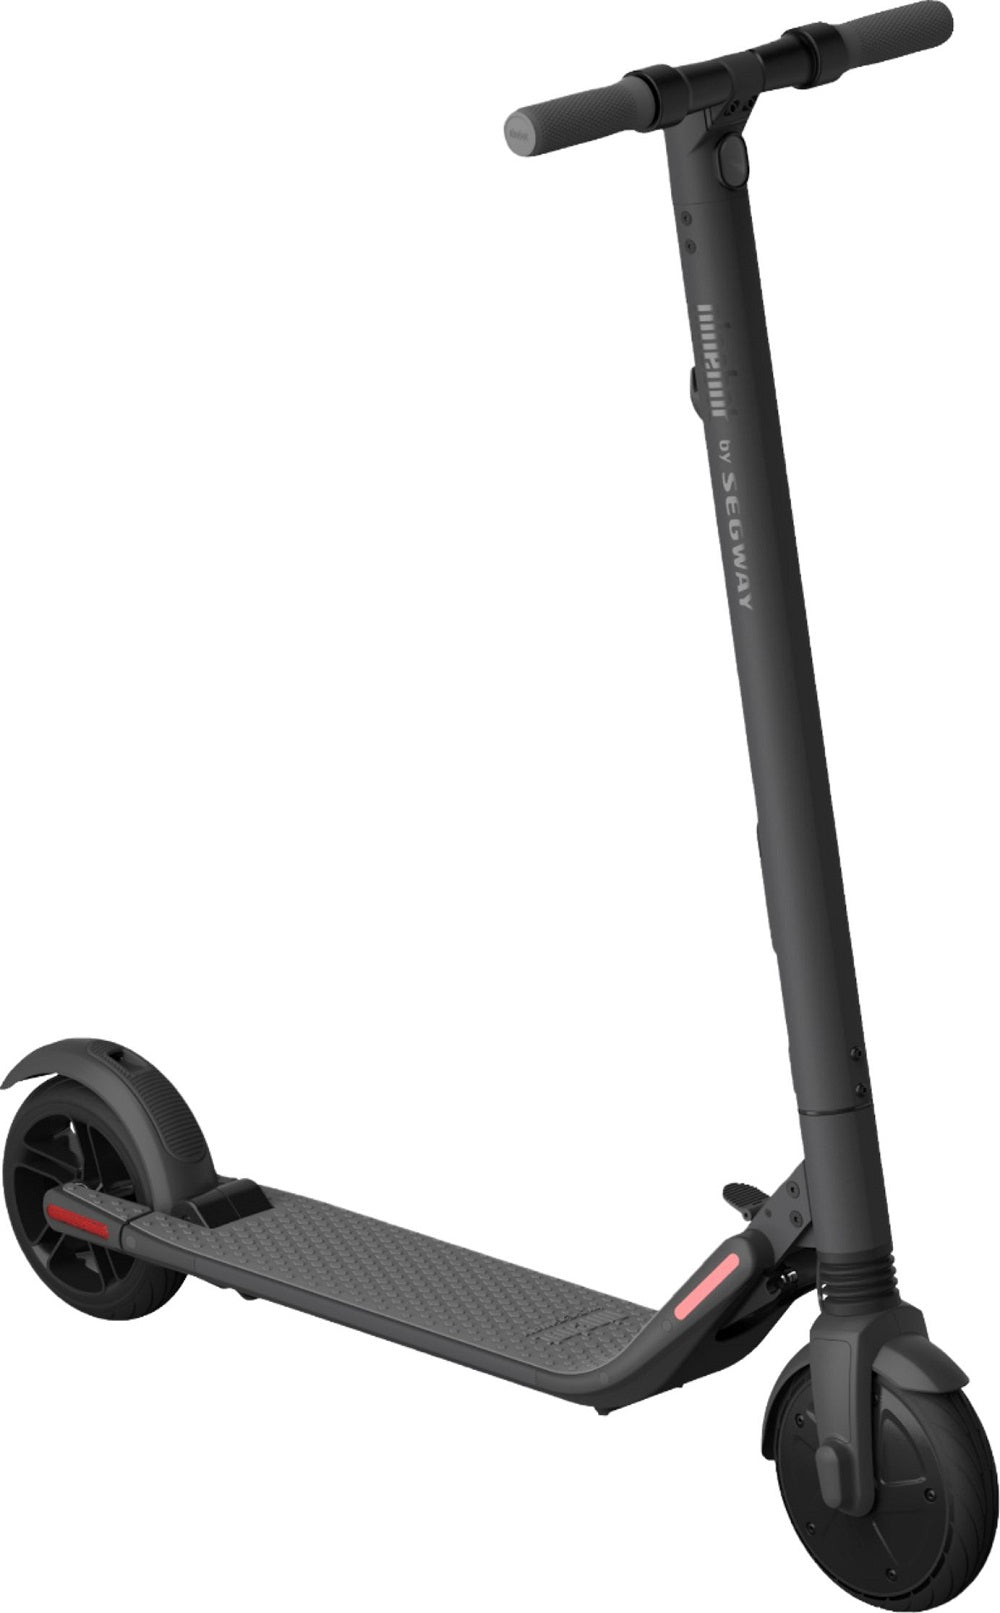 Segway Ninebot ES2-N Foldable Electric Scooter w/ 15.5mph Max Speed - Dark Gray (Refurbished)